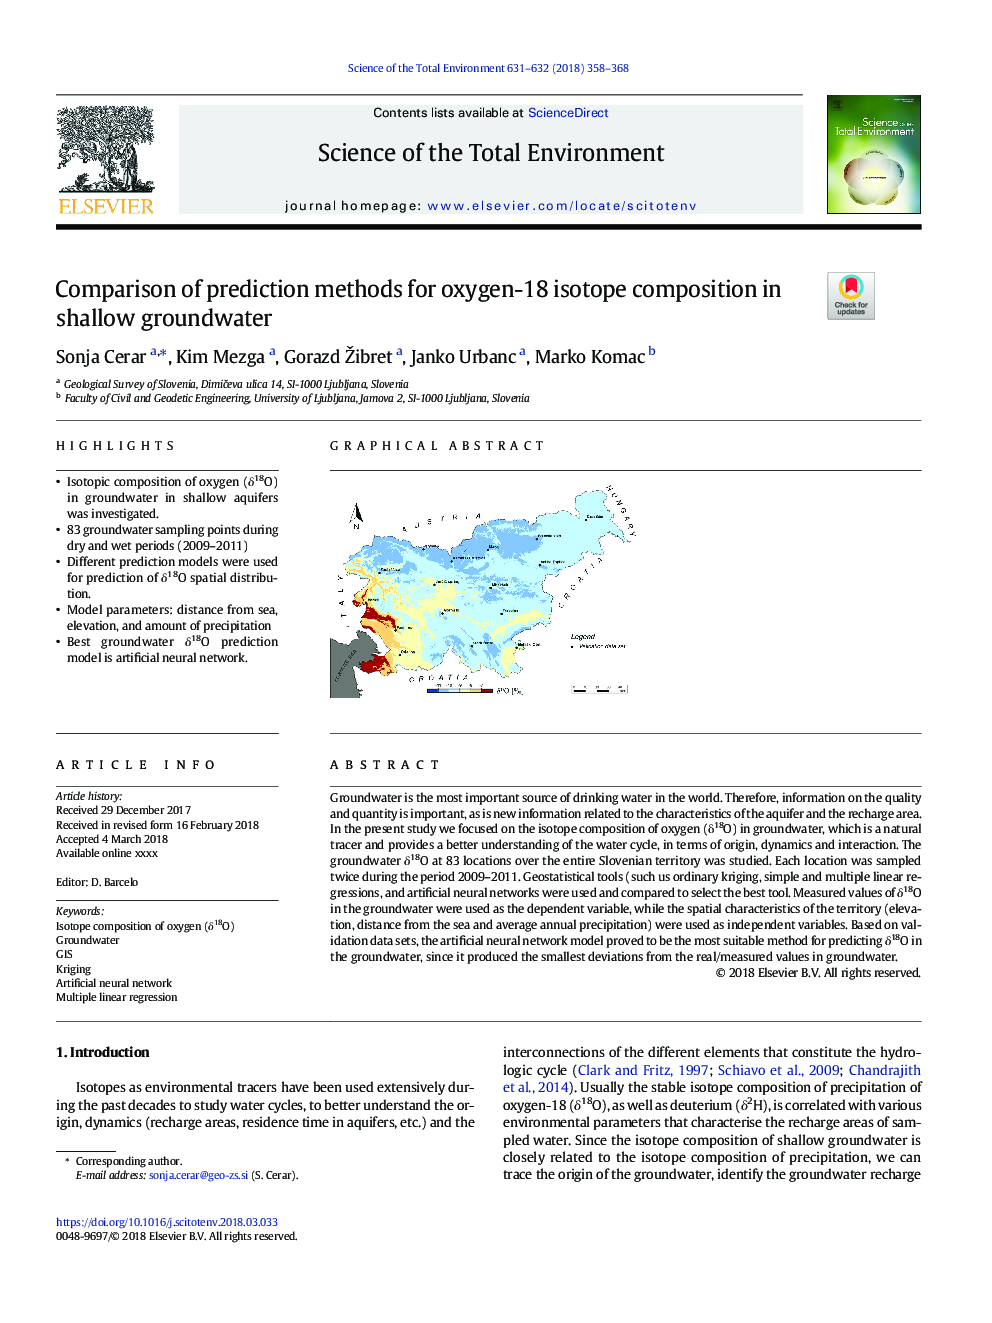 Comparison of prediction methods for oxygen-18 isotope composition in shallow groundwater